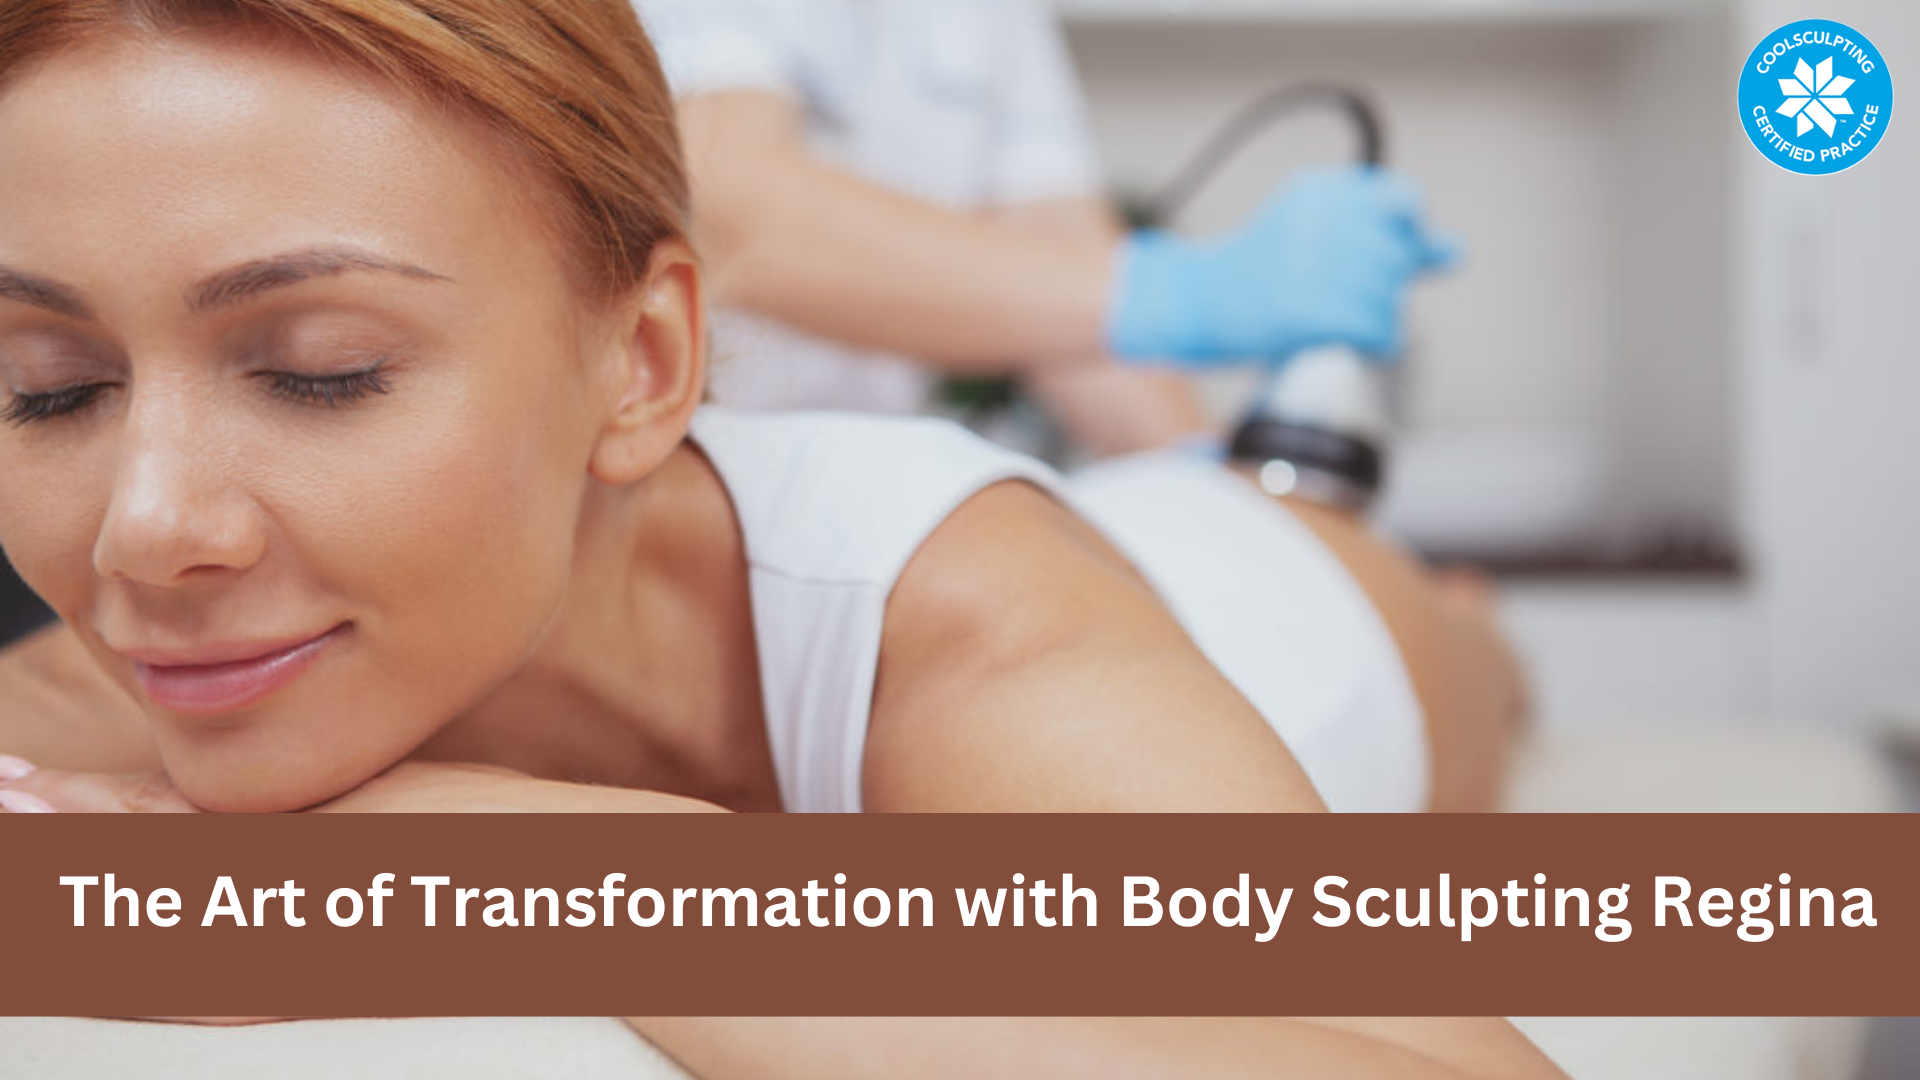 Discover the Art of Transformation with Body Sculpting Regina | TheAmberPost